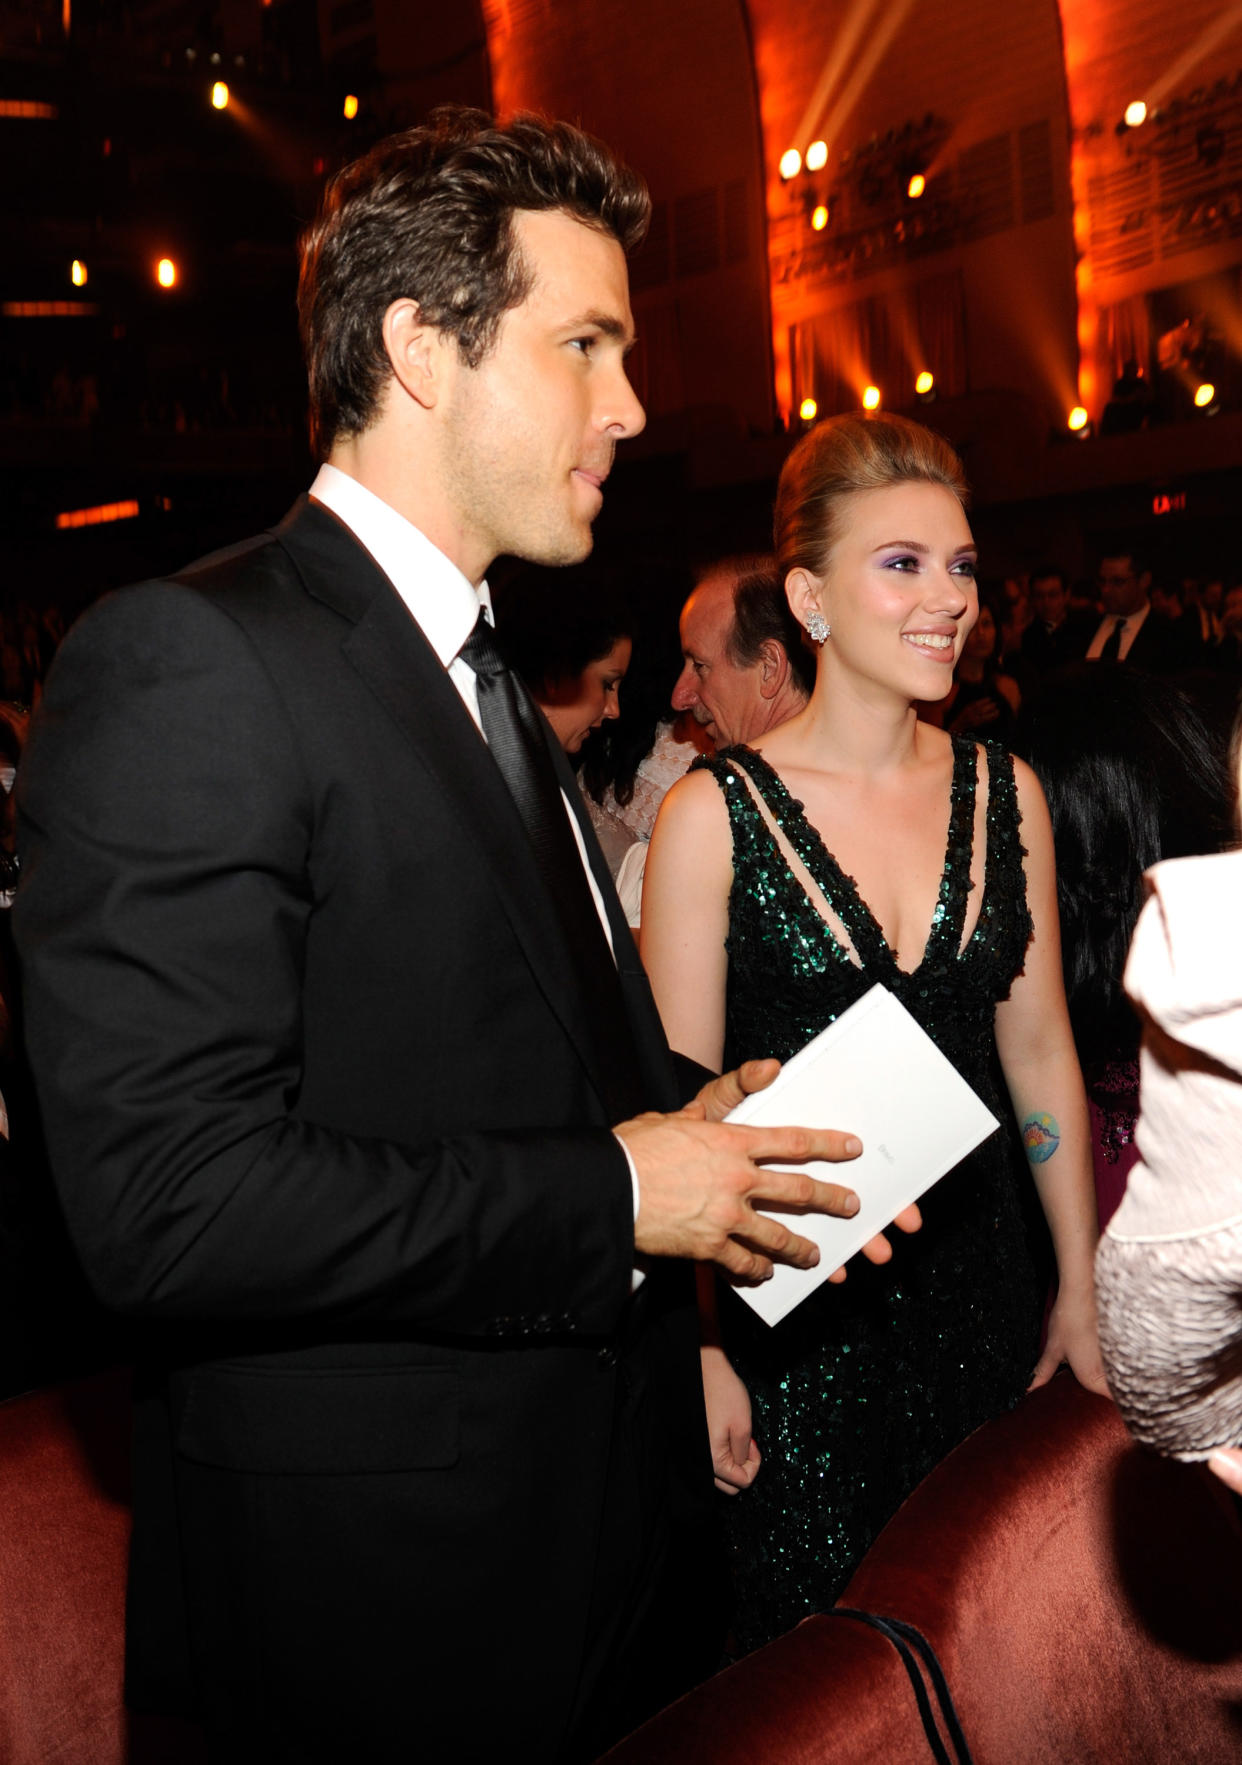 Ryan Reynolds and Scarlett Johansson at the 64th annual Tony Awards at Radio City Music Hall on June 13, 2010 in New York City. (Kevin Mazur / WireImage)